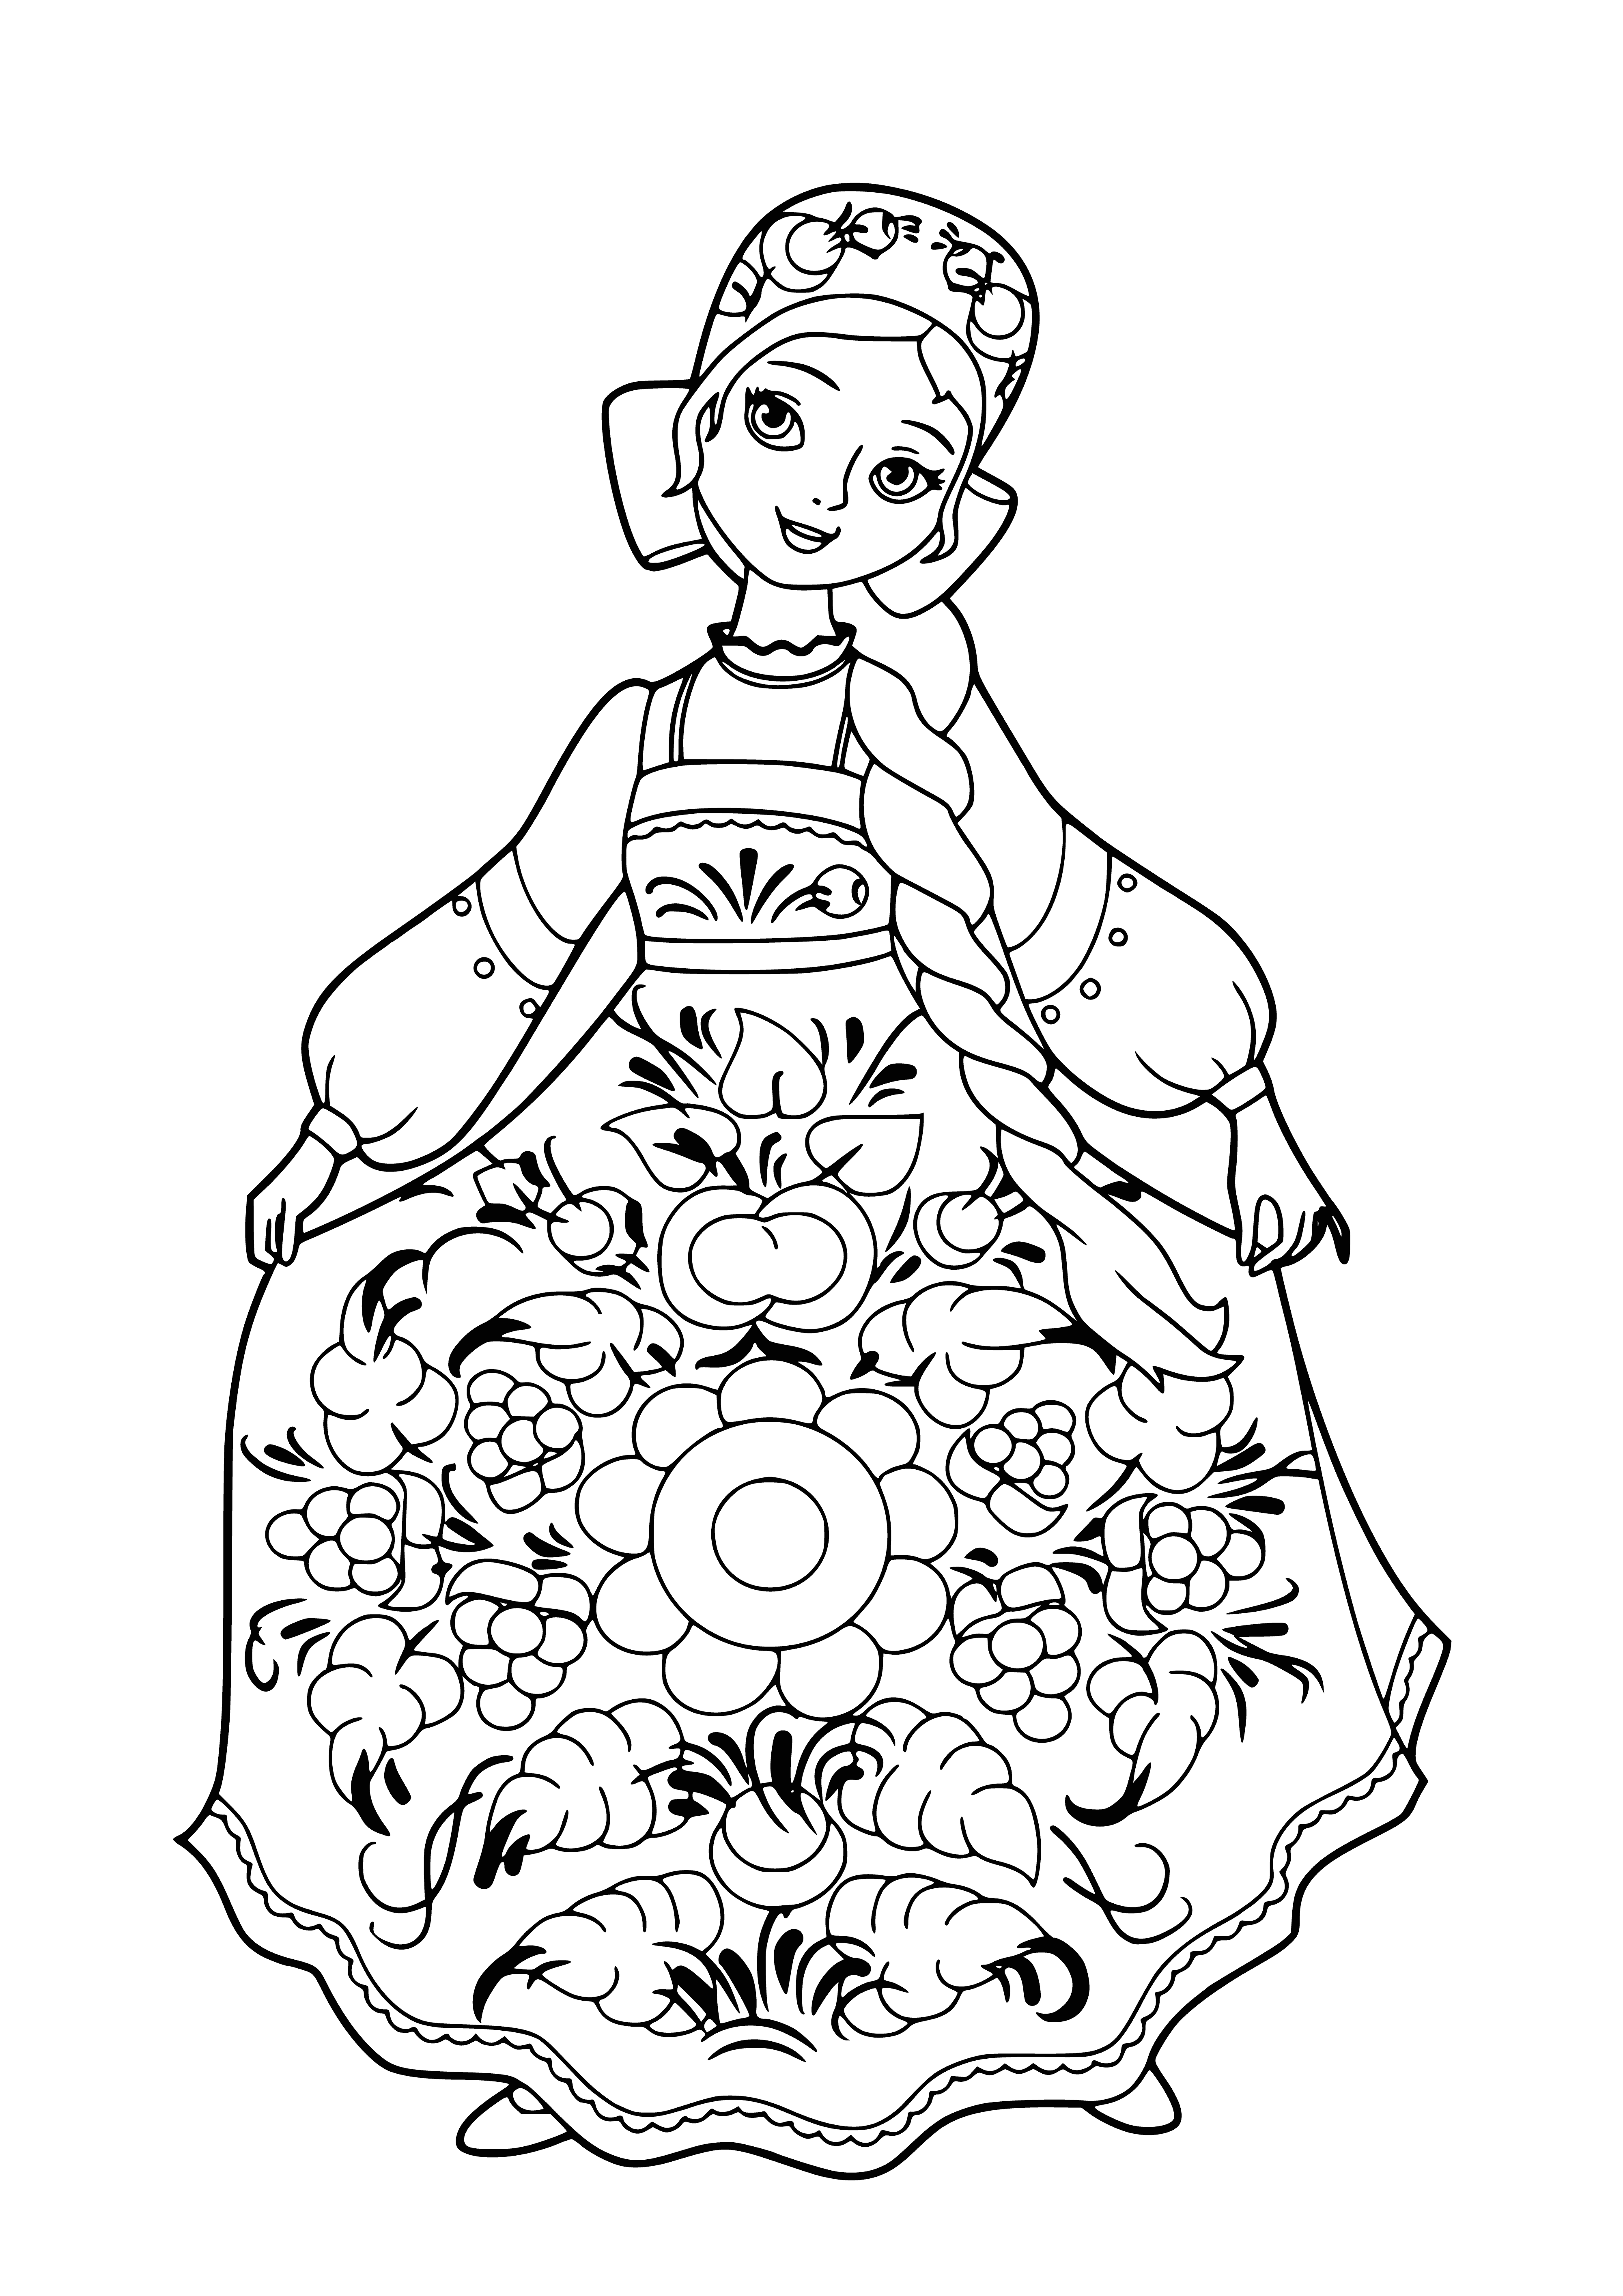 coloring page: She's chic in a long white dress, fur shawl, and red scarf; blonde hair in a bun, wearing earrings w/ red stone, and carrying a white bag.